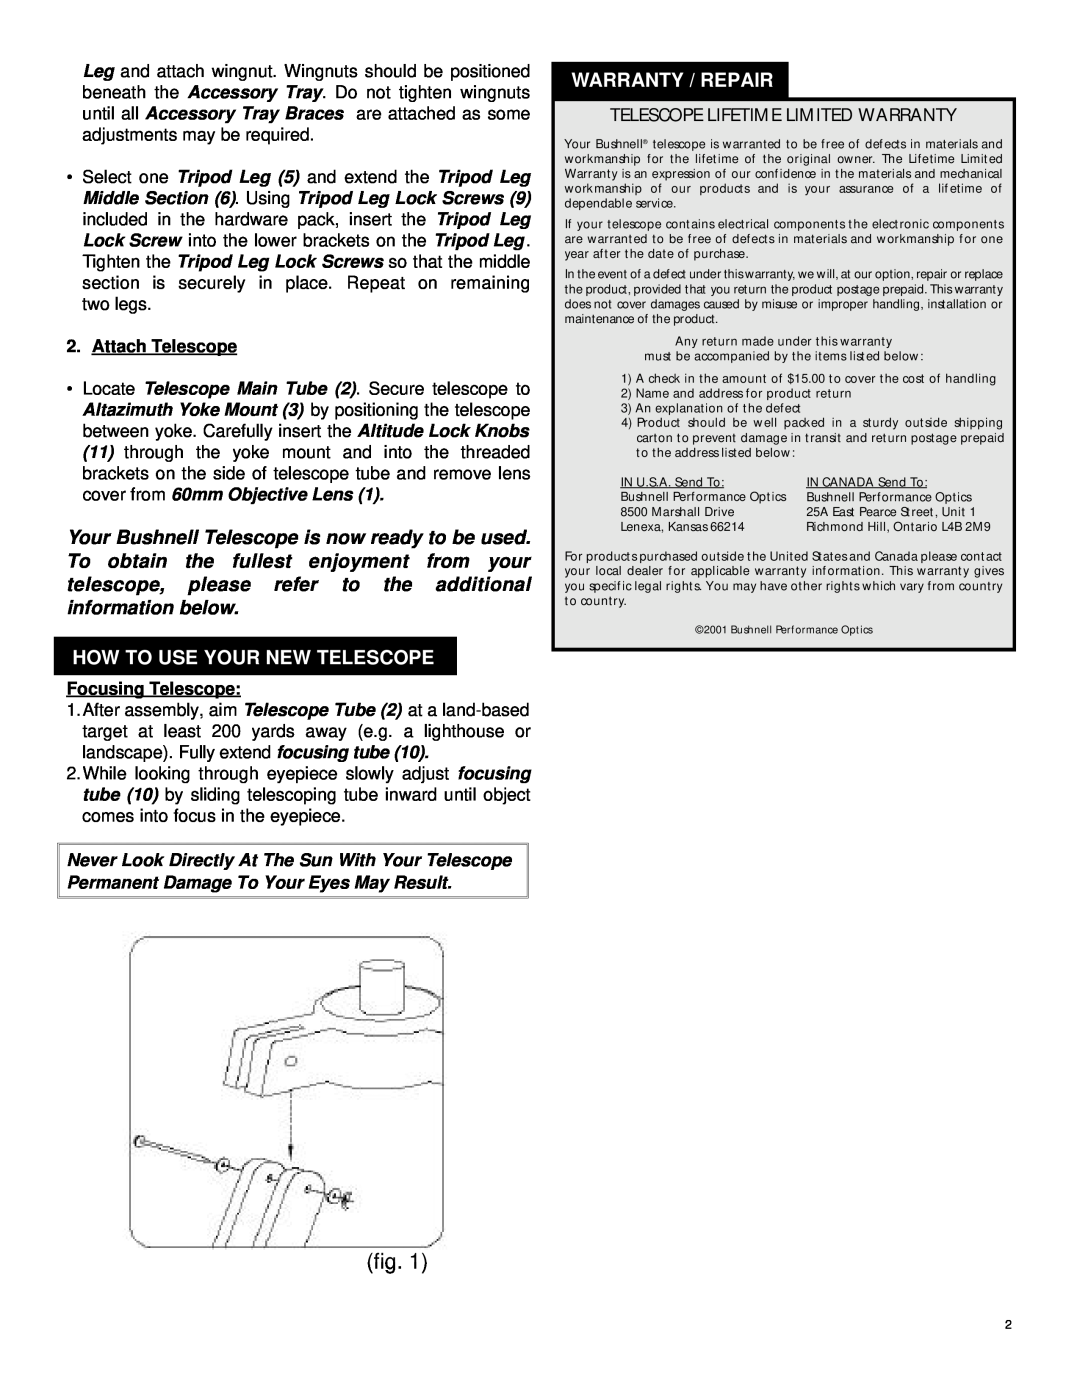 Bushnell 78-6035 manual How To Use Your New Telescope, Warranty / Repair, Attach Telescope, Focusing Telescope 